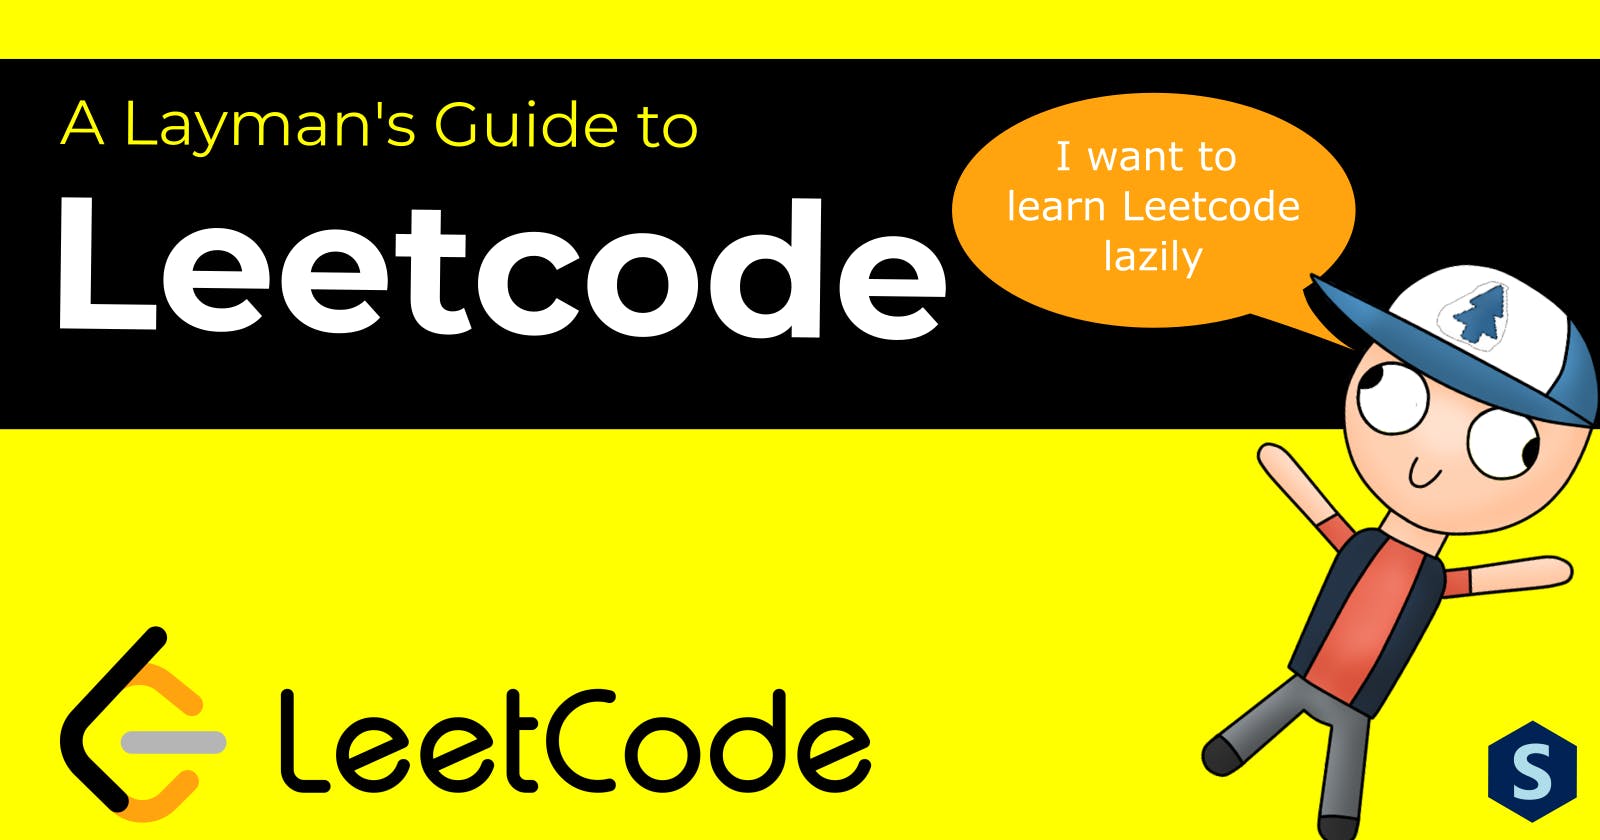 A Layman's Guide to Leetcode